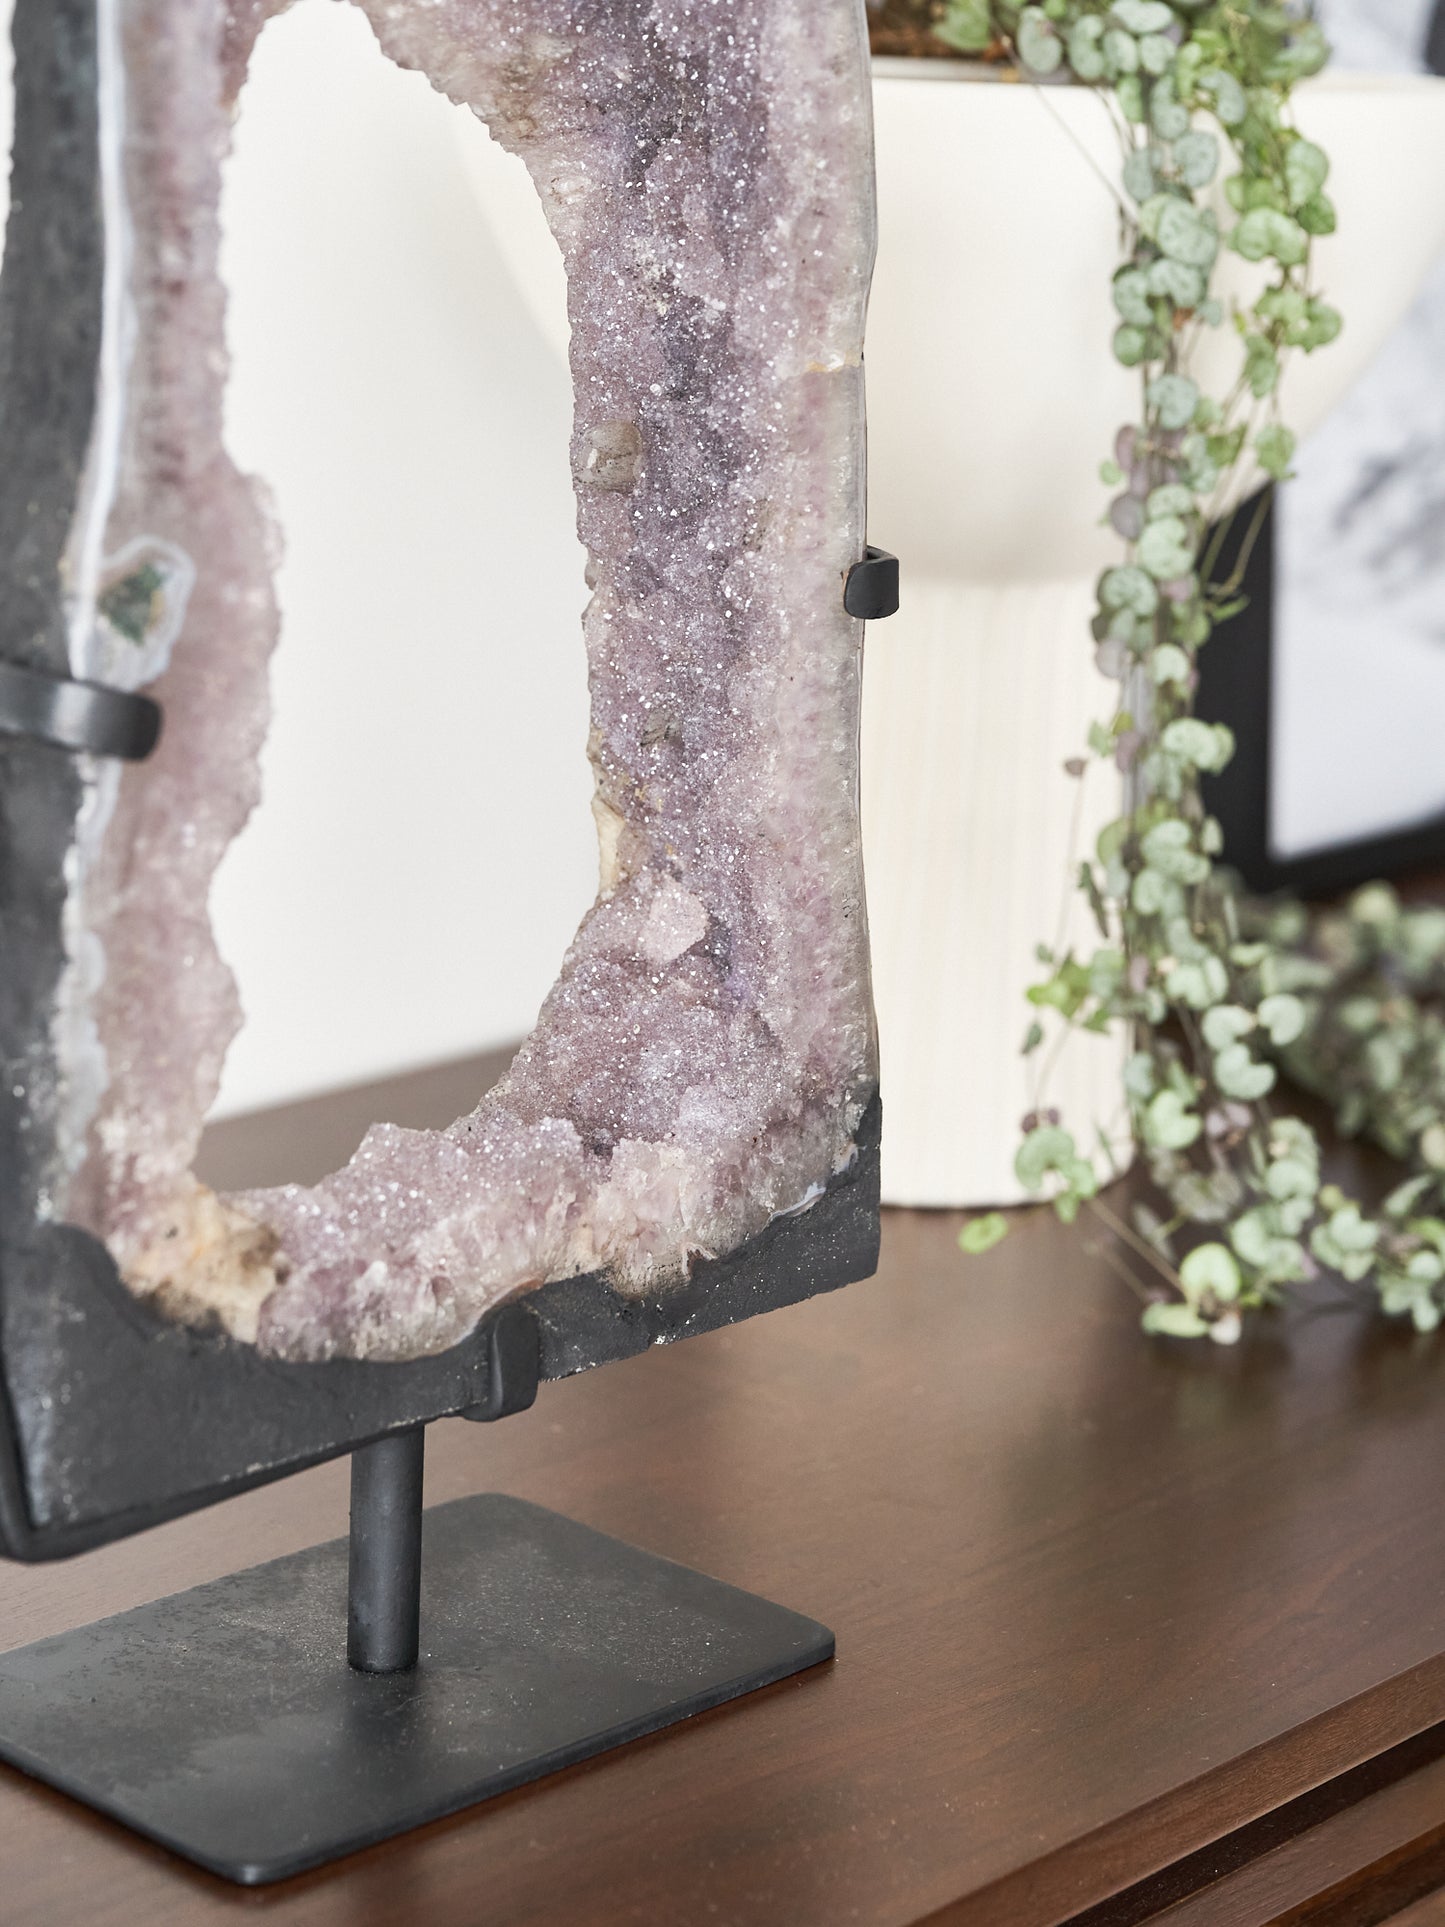 Amethyst Jaws Geode on Stand 7.67kg